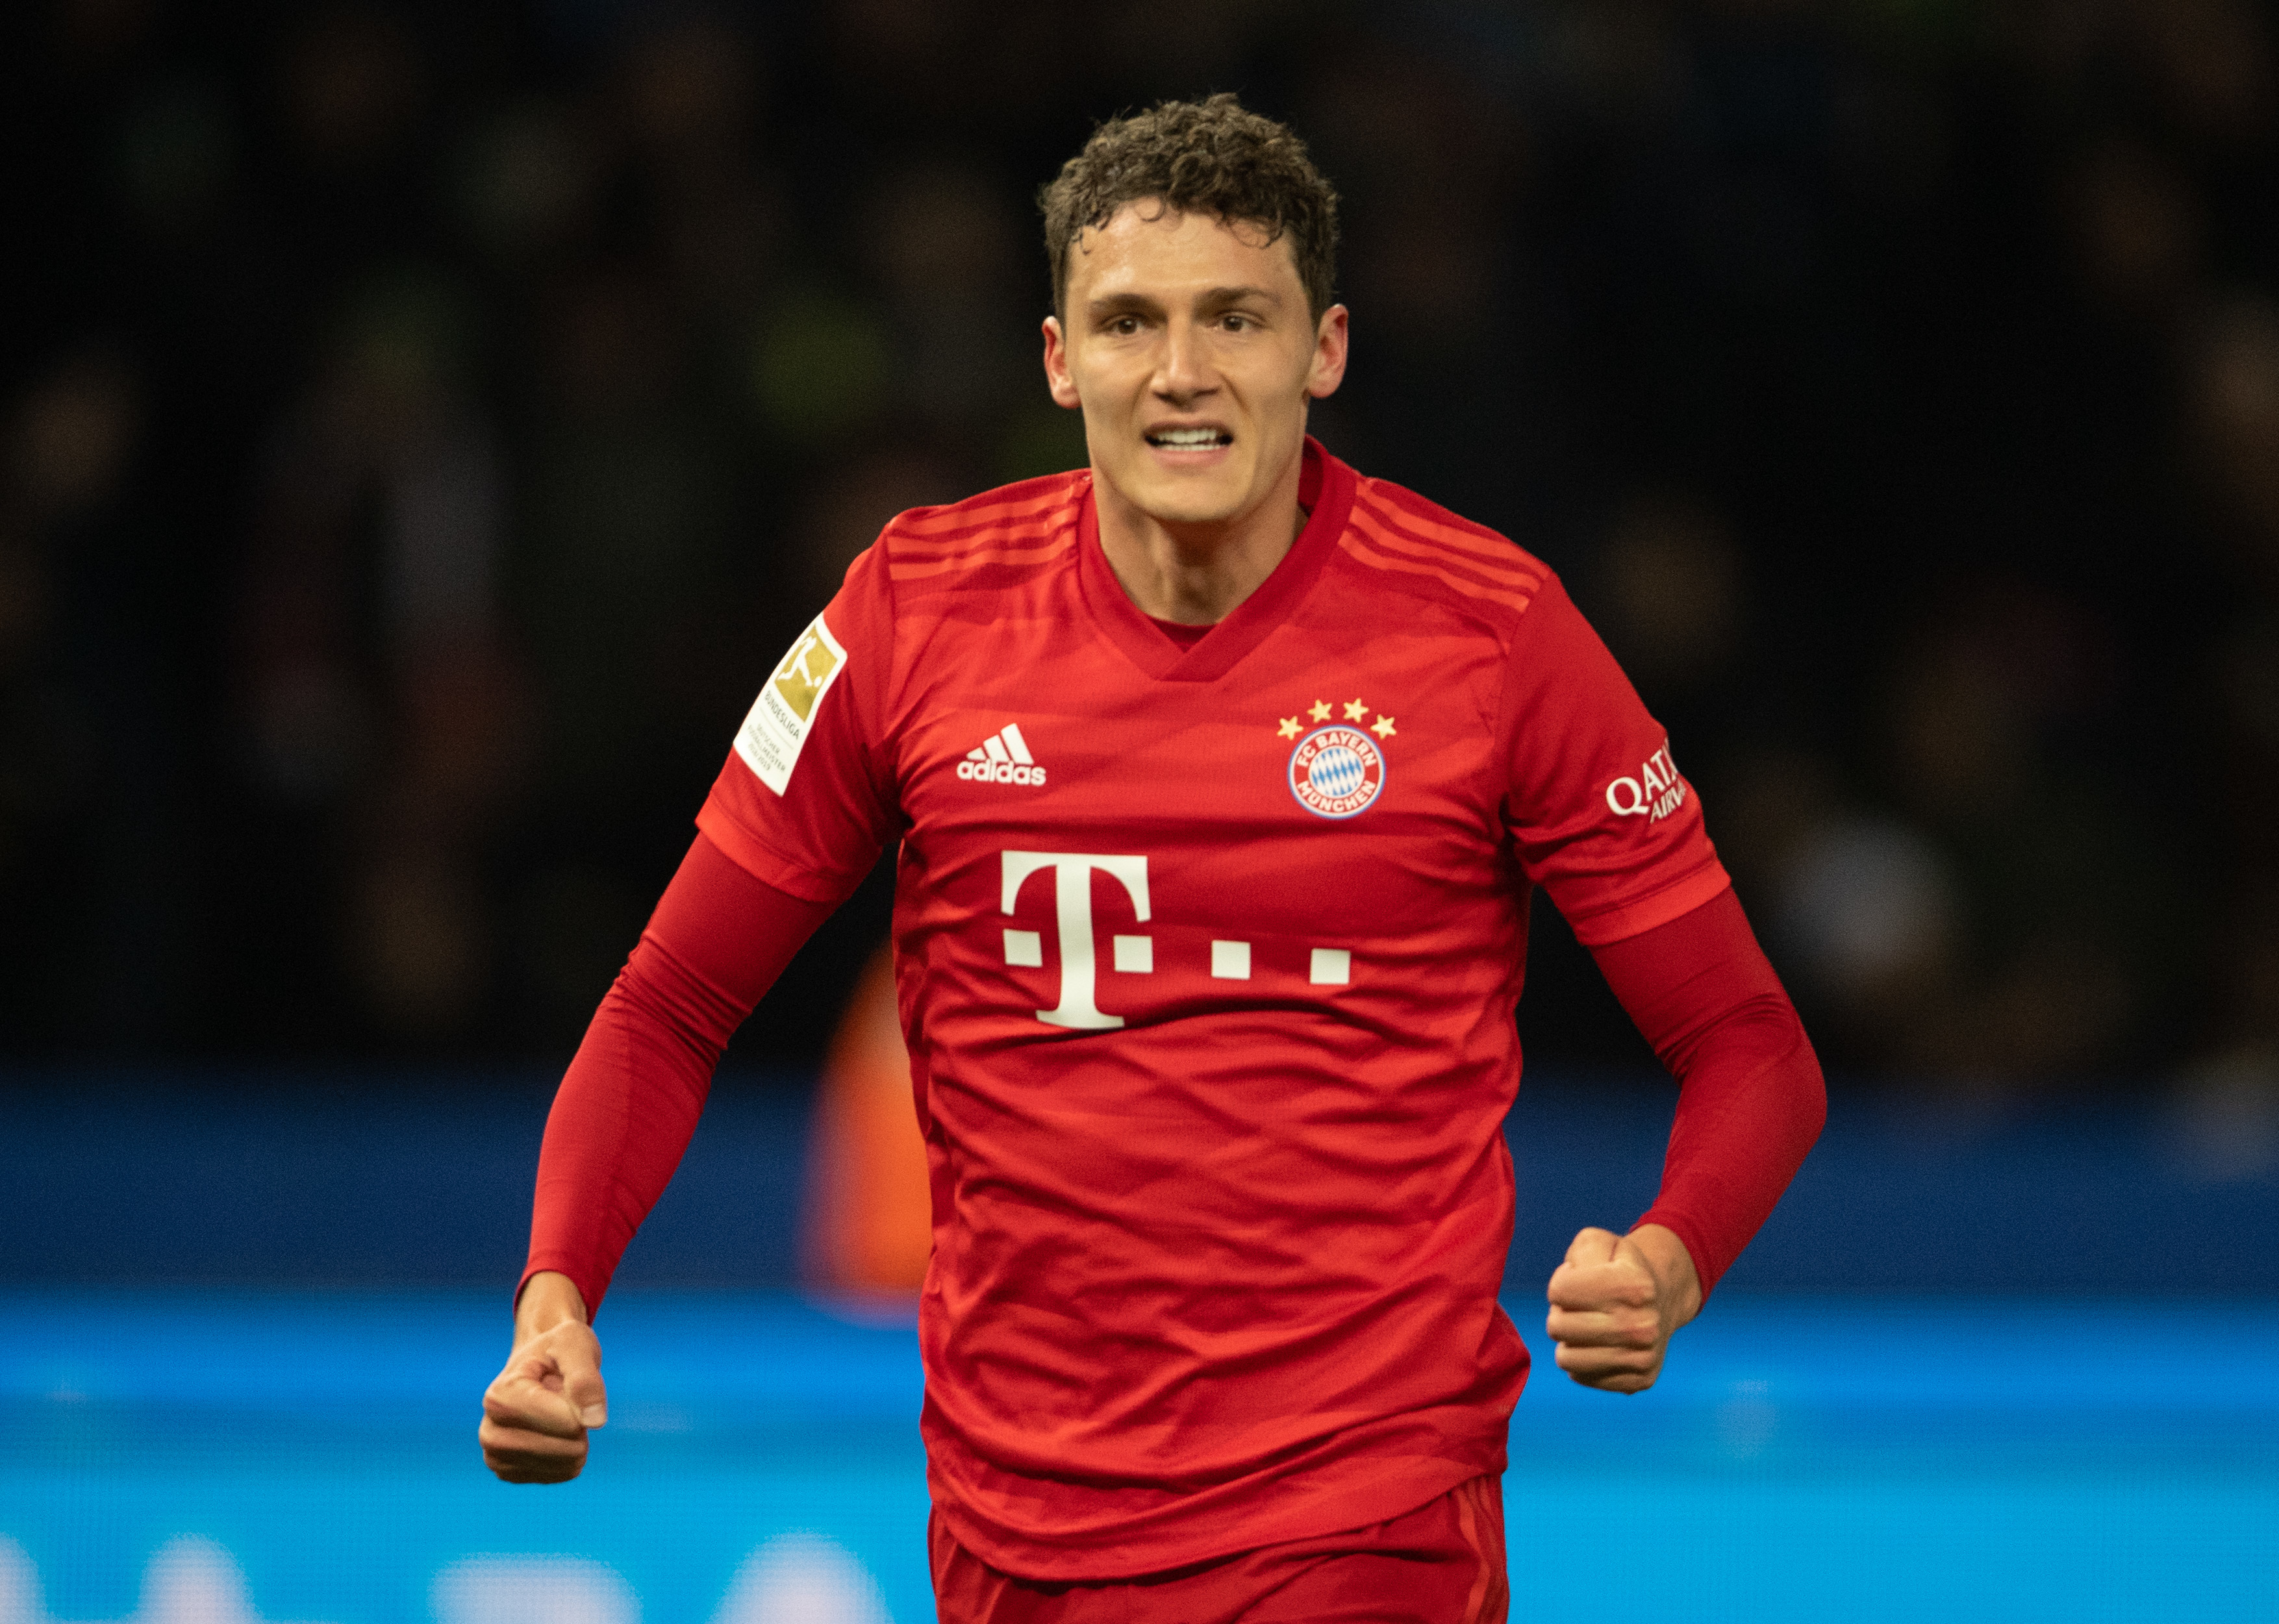 Bayern have a squad good enough to win the treble, proclaims Benjamin Pavard